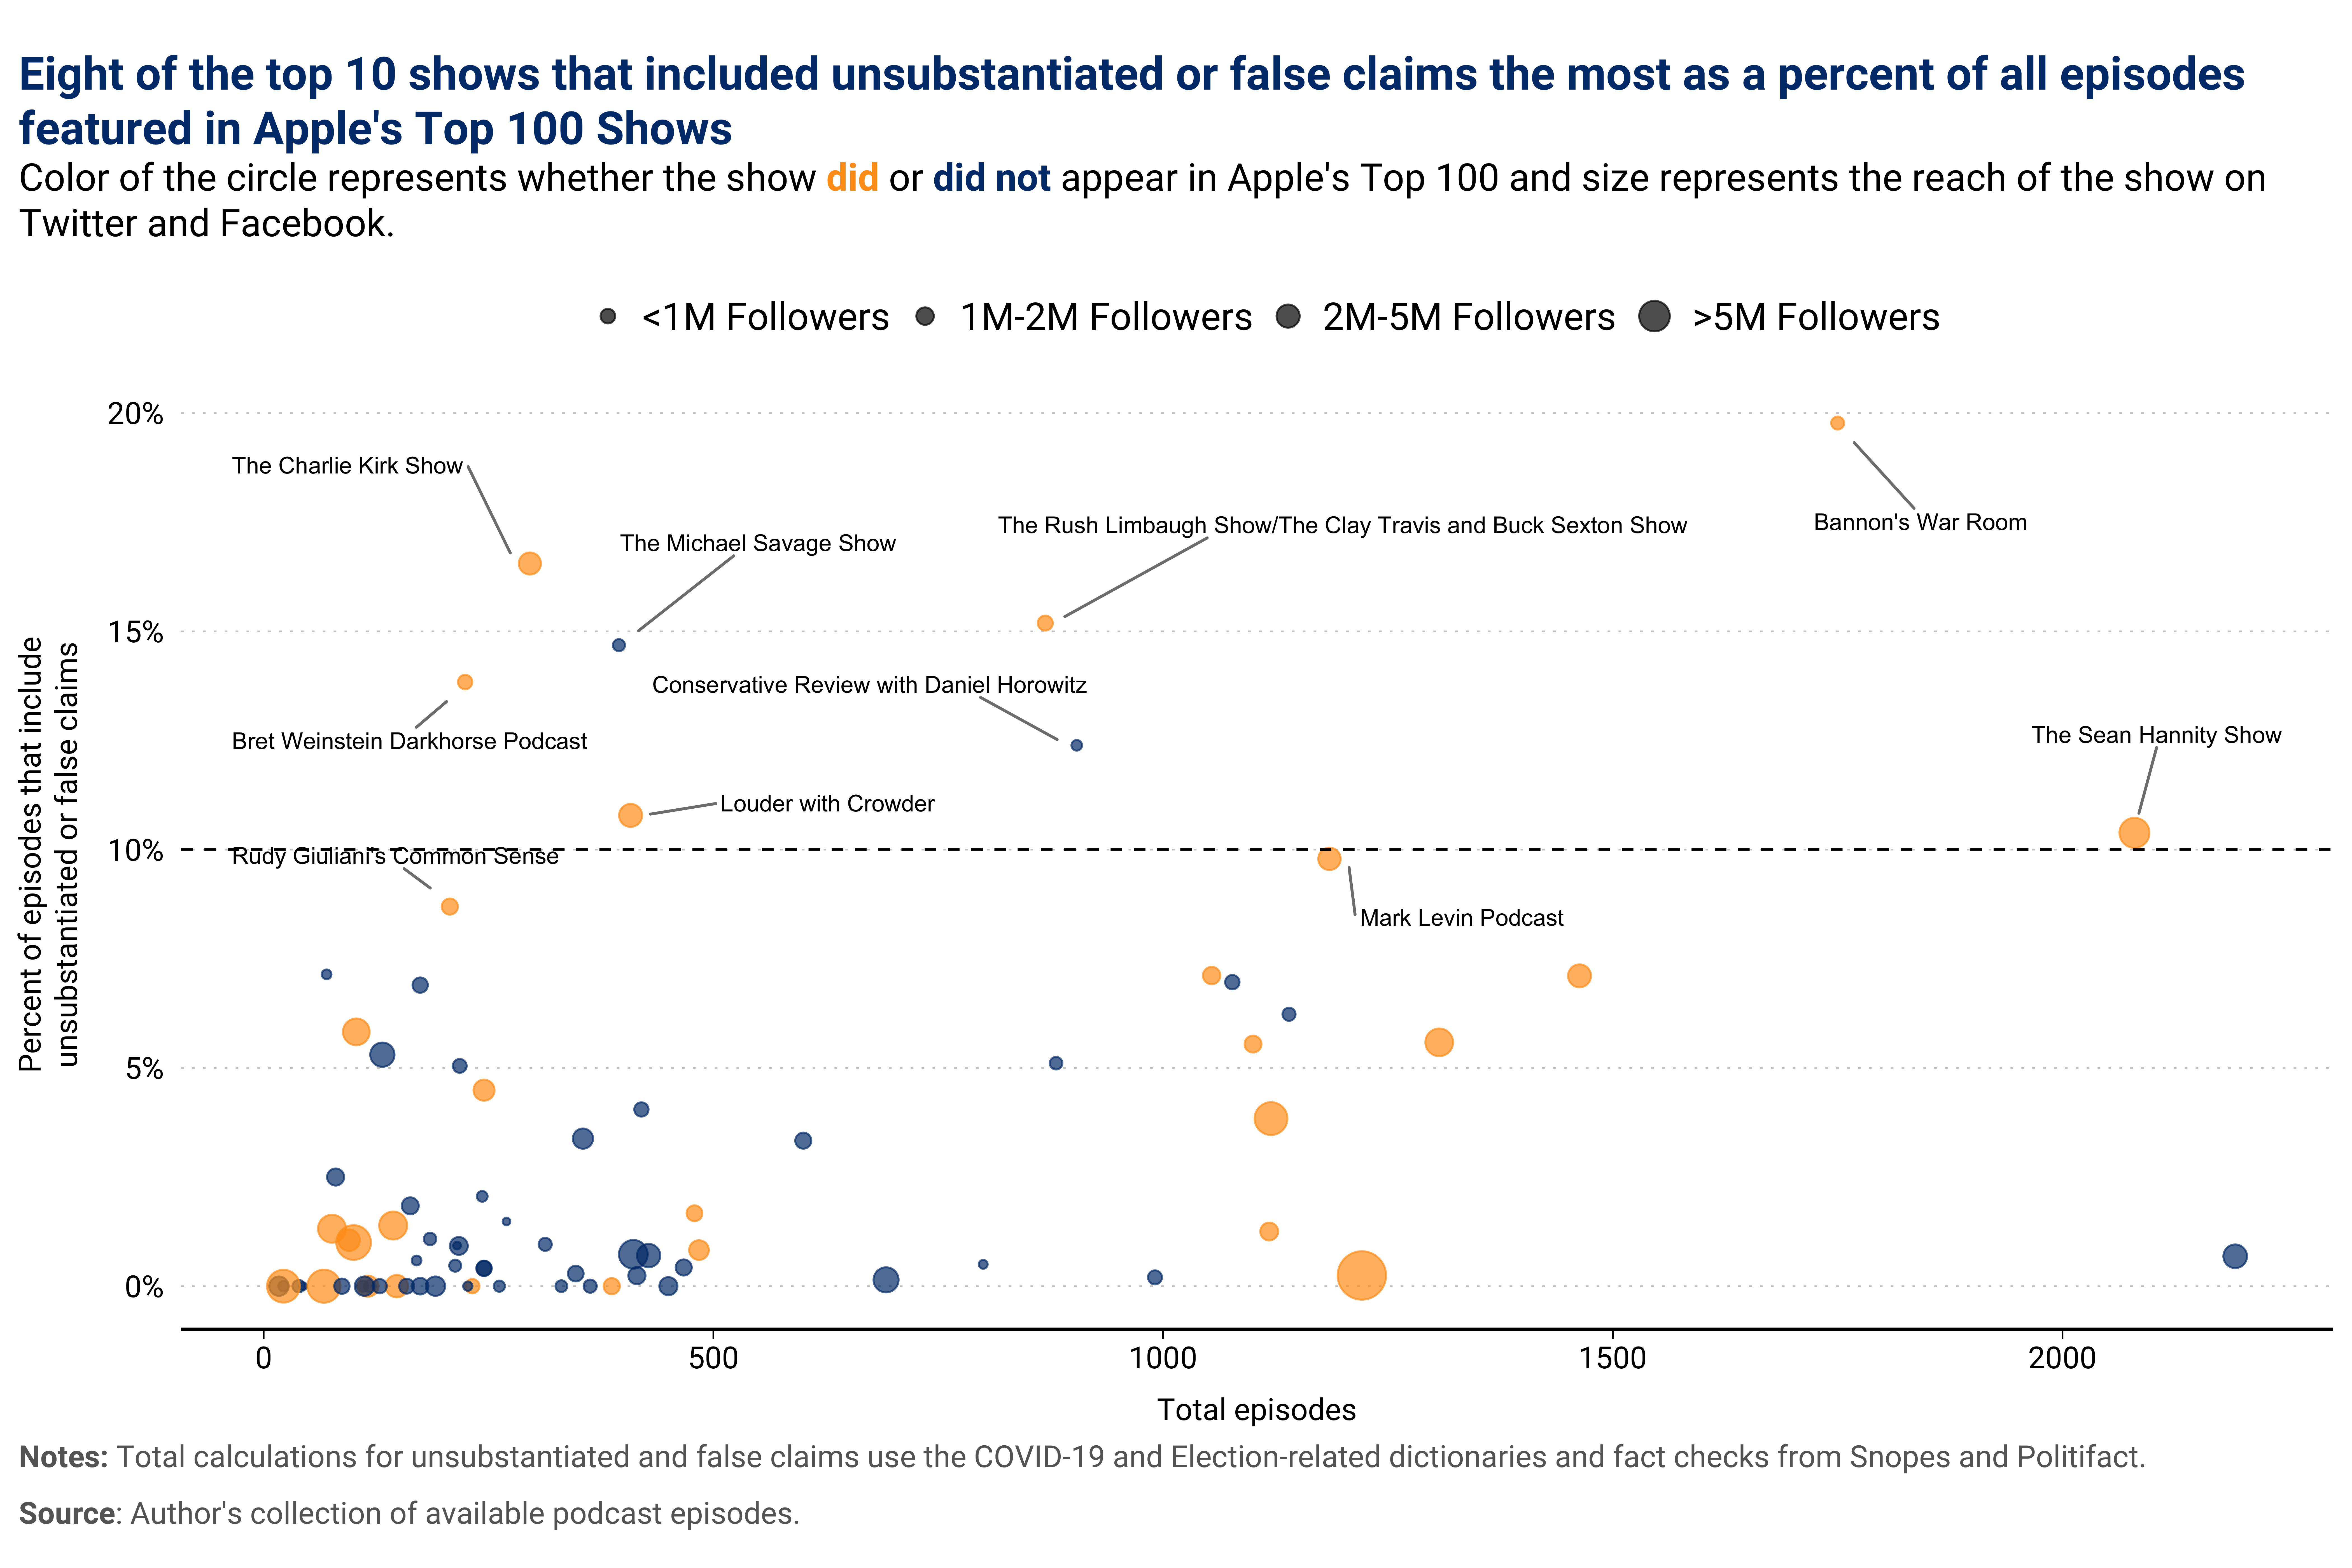 Figure: The figure shows that shared unsubstantiated or false content as a percentage of total episodes, as well as whether those shows entered the dataset due to their popularity or Apple’s recommender system. Bannon’s War Room, which produced both a high number of episodes and shared the most unsubstantiated or false claims in the dataset tops the list, with close to 20% of all episodes including claims flagged as false by fact checkers or the dictionary of terms. Seven other shows feature unsubstantiated or false claims in more than 10% of all episodes assessed during this period. 